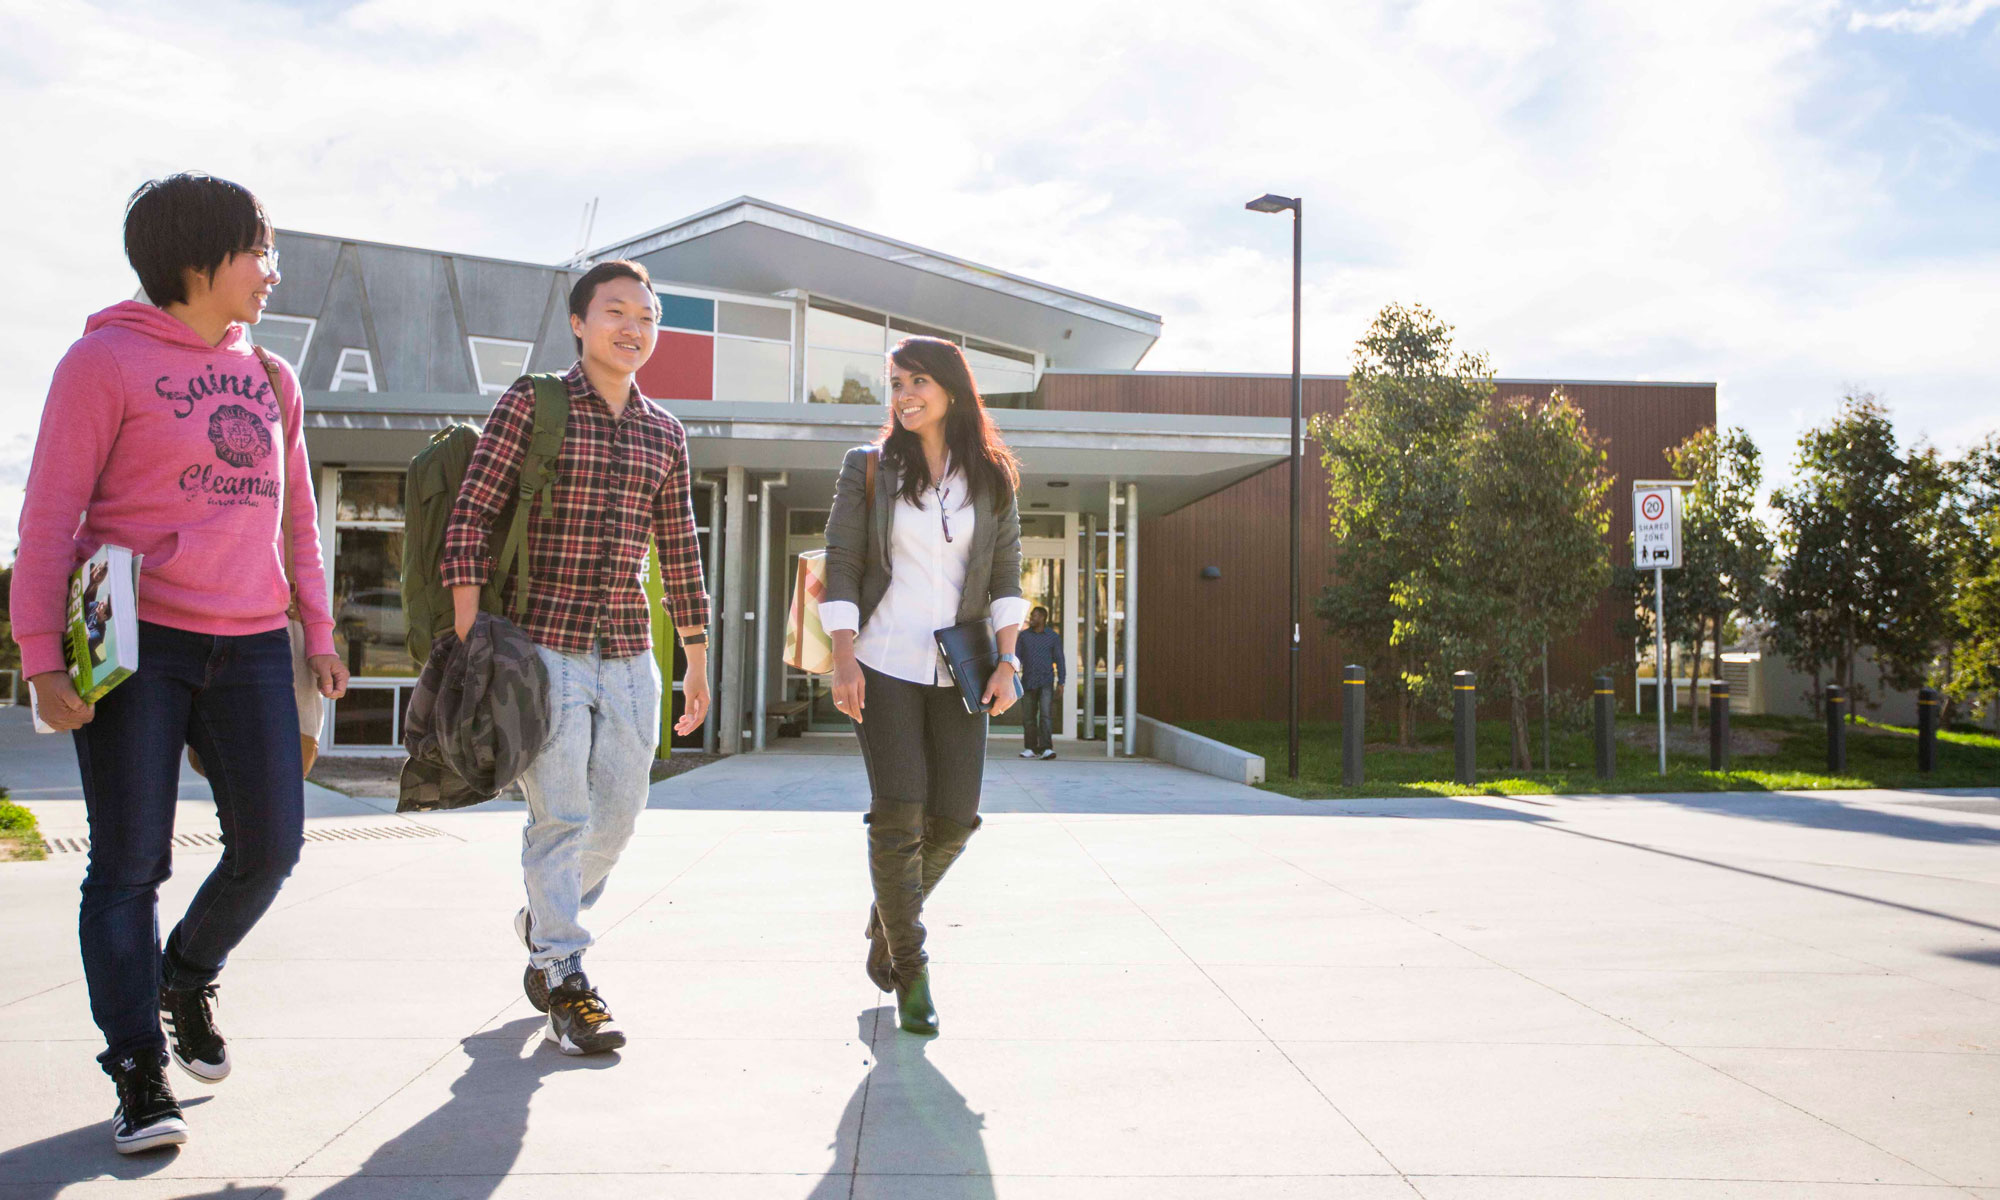 Pacific Cambria University Ranking – Where So Ever You Go, Go With Your Heart